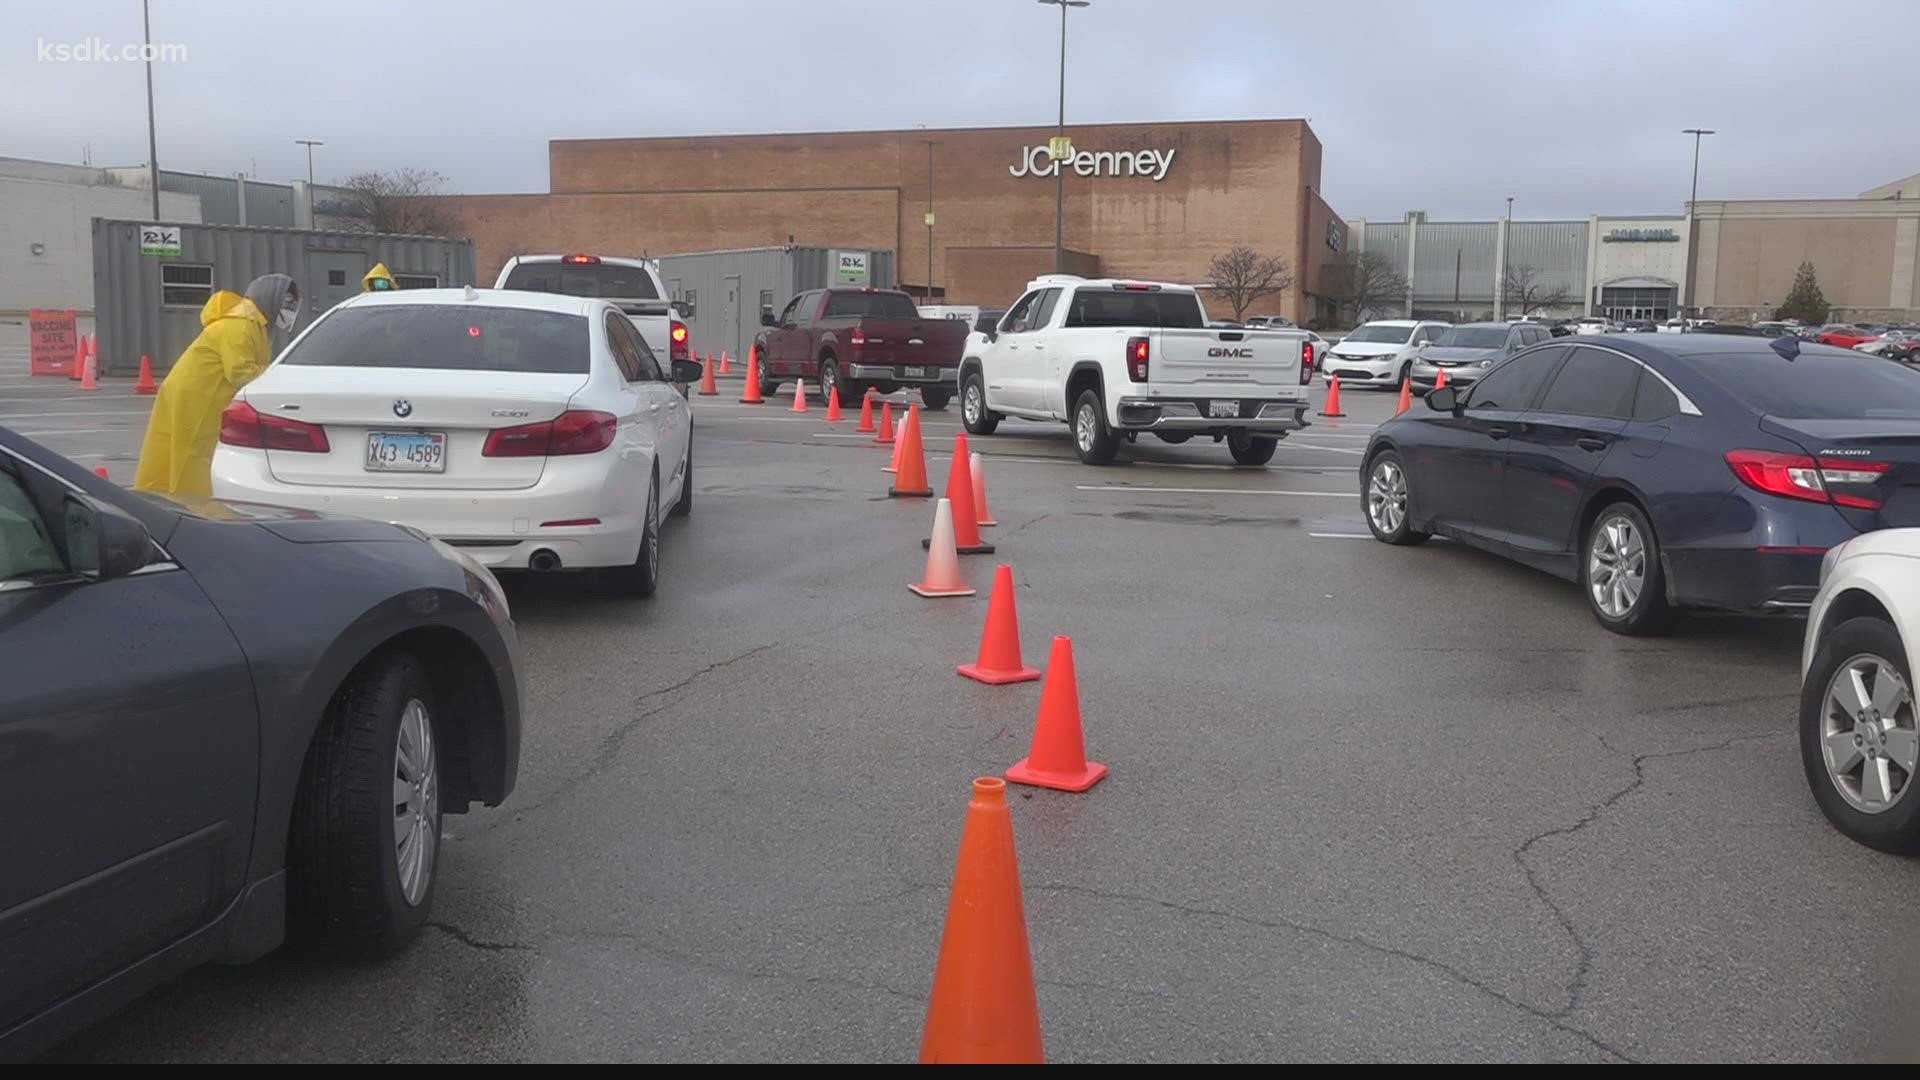 The demand for testing and vaccines is increasing again as omicron concerns rise. At one mass testing and vaccination facility, the cars lined up Tuesday.